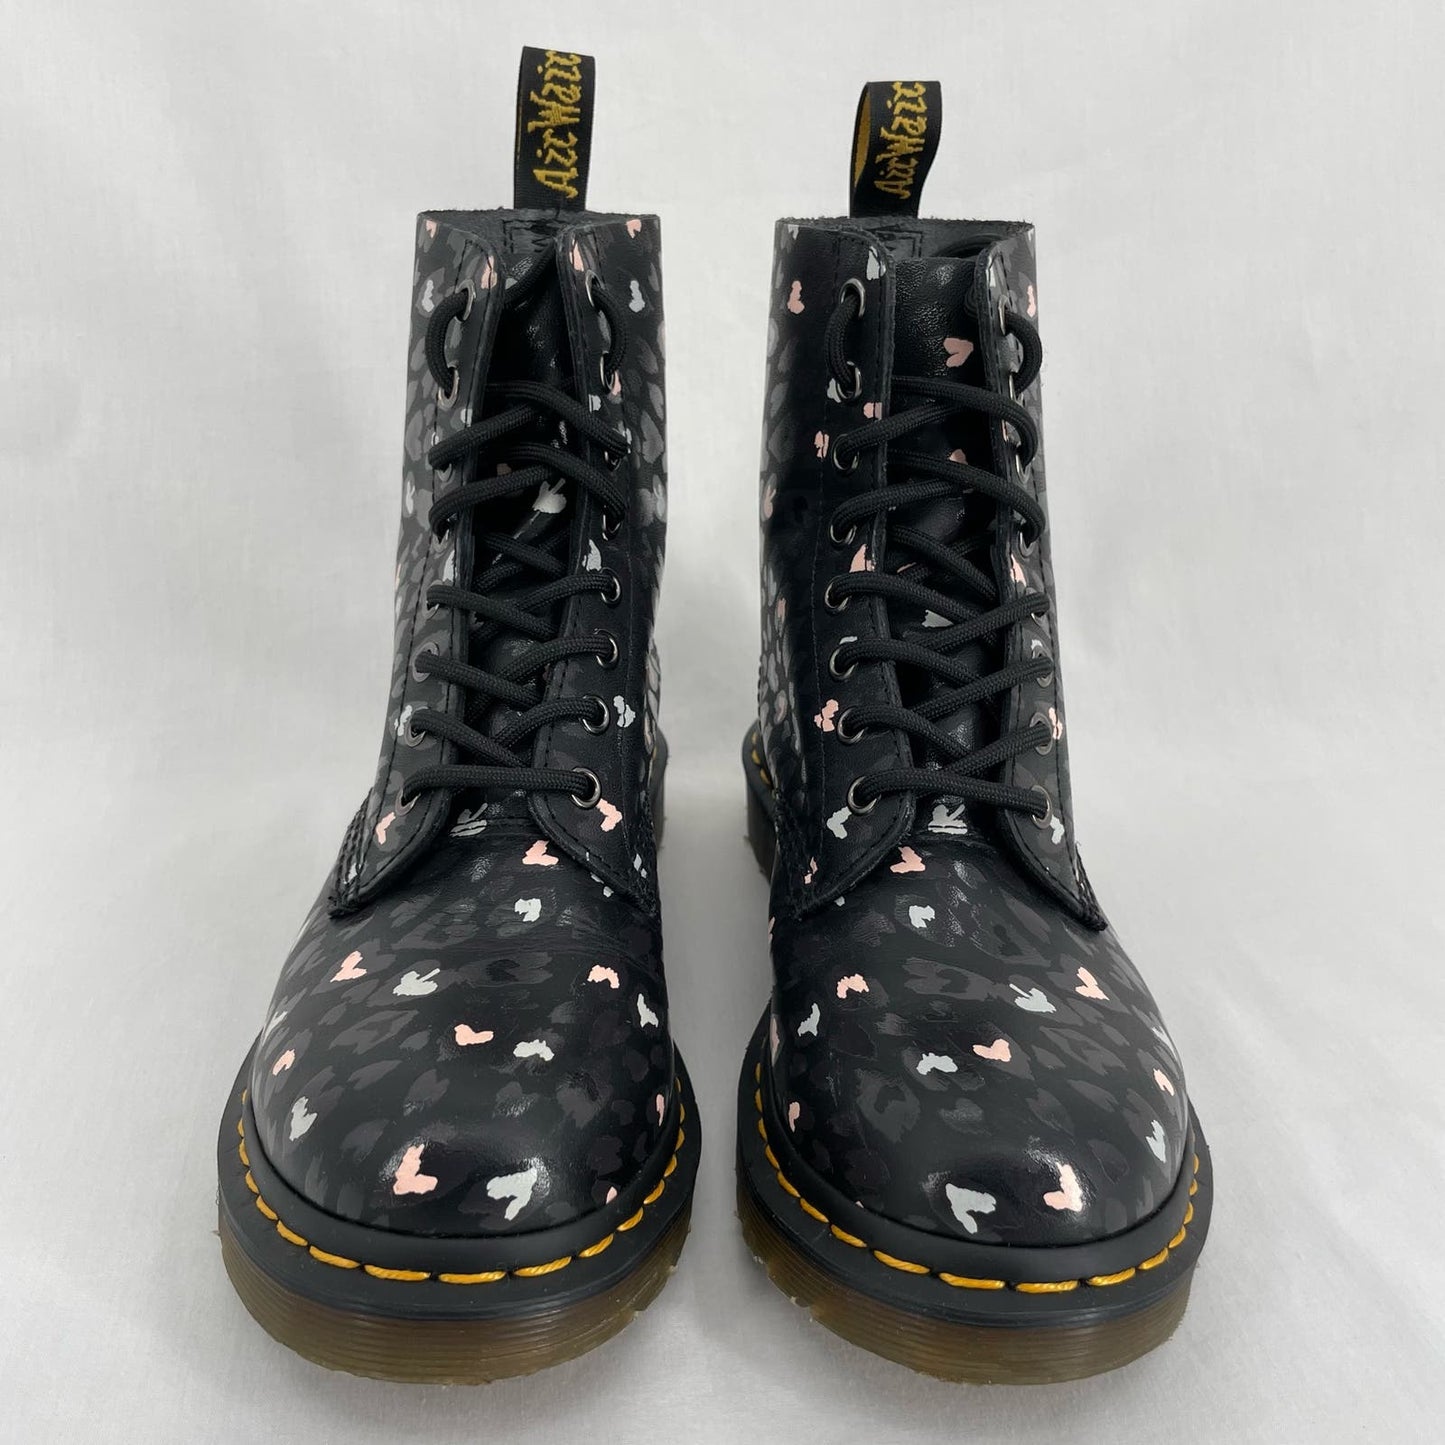 Dr. Martens 1460 Pascal Wild Hearts Printed Black Boots Custom Chaos Backhand Size 7